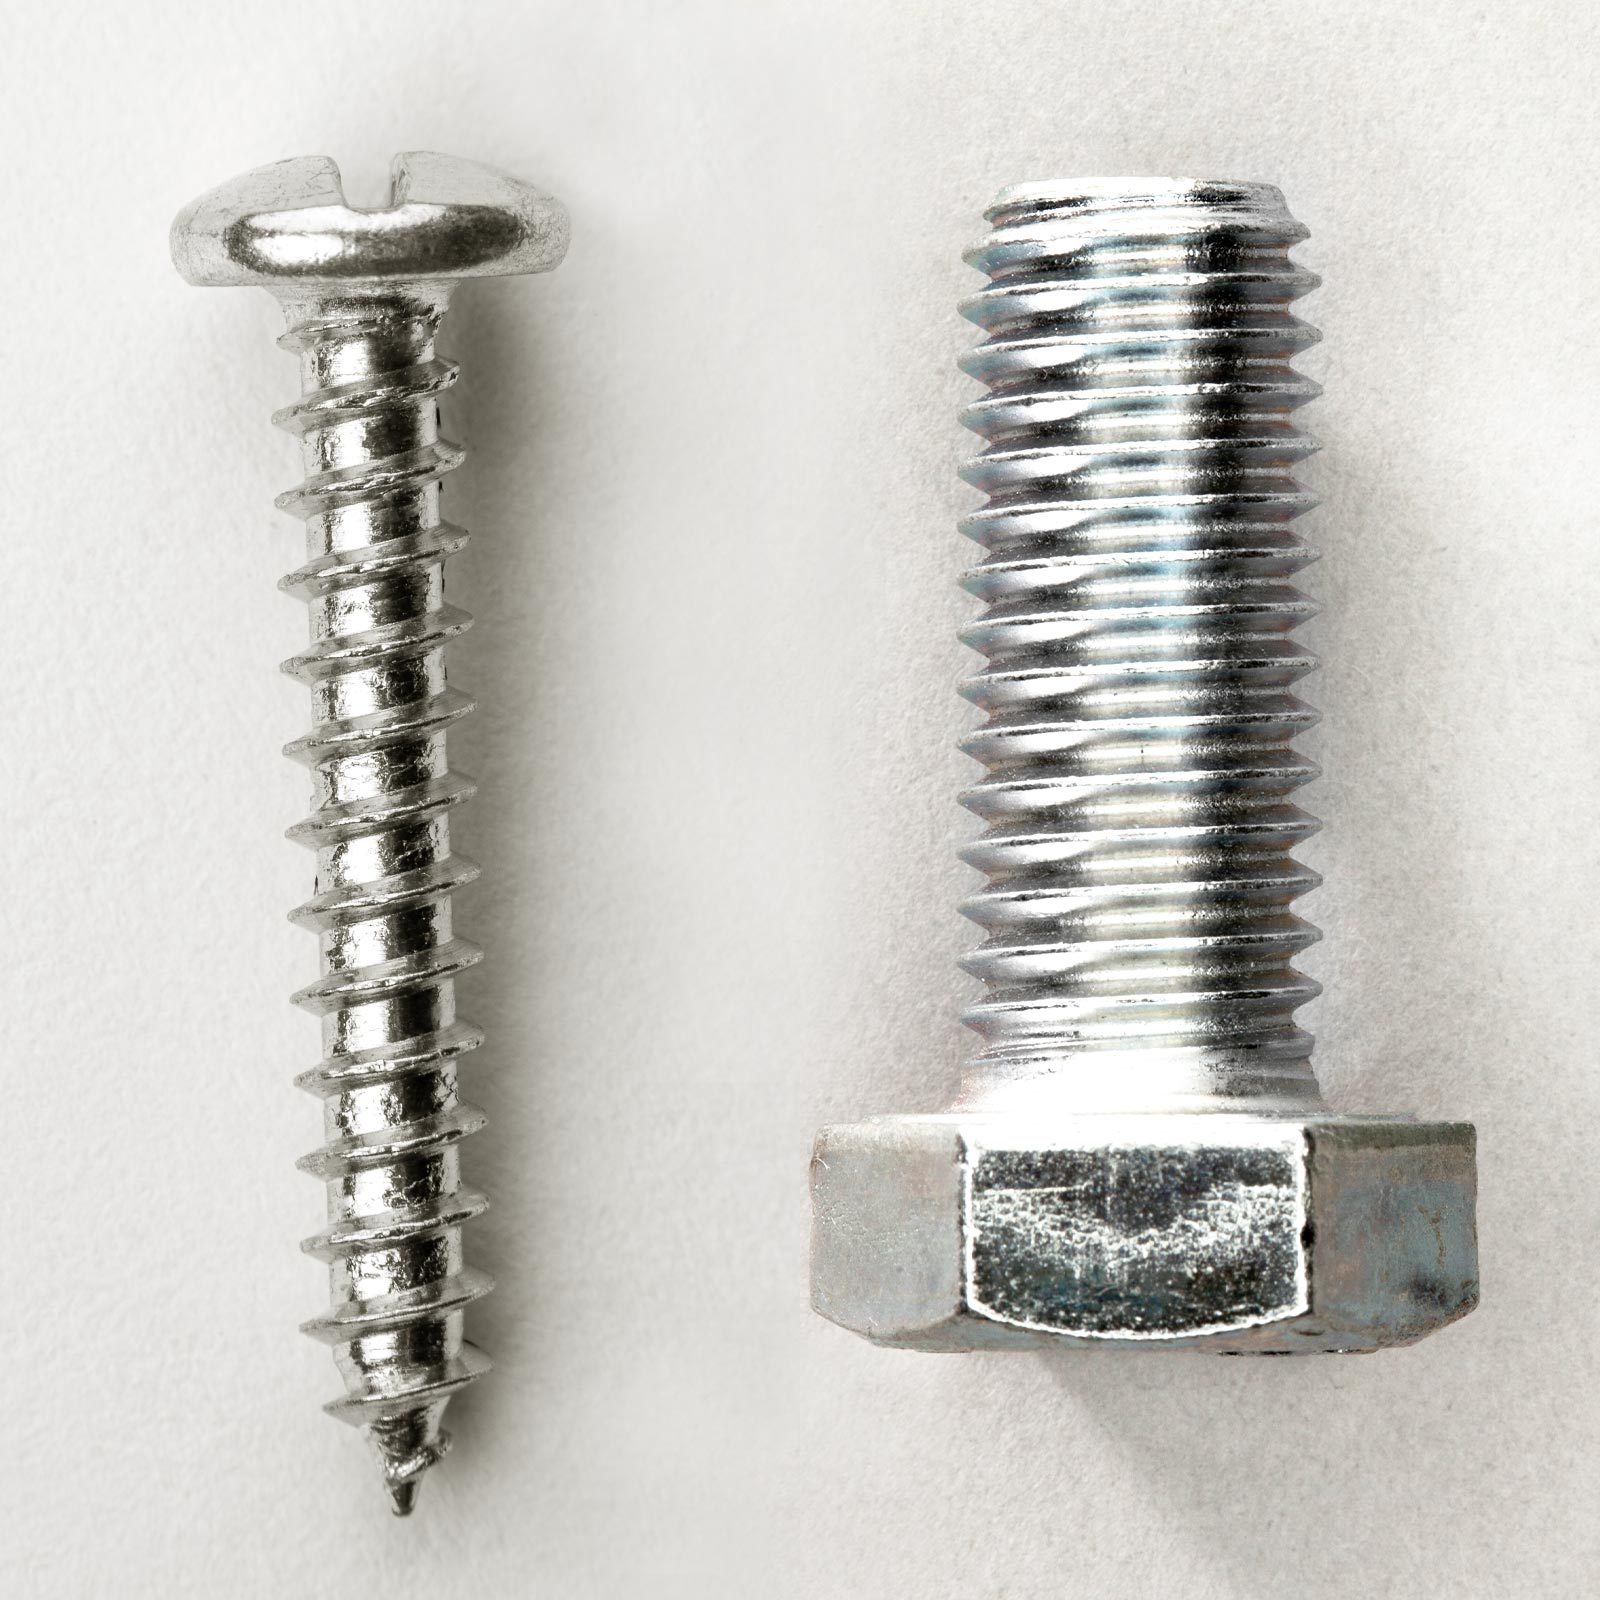 Screws vs. Bolts: What's the Difference?